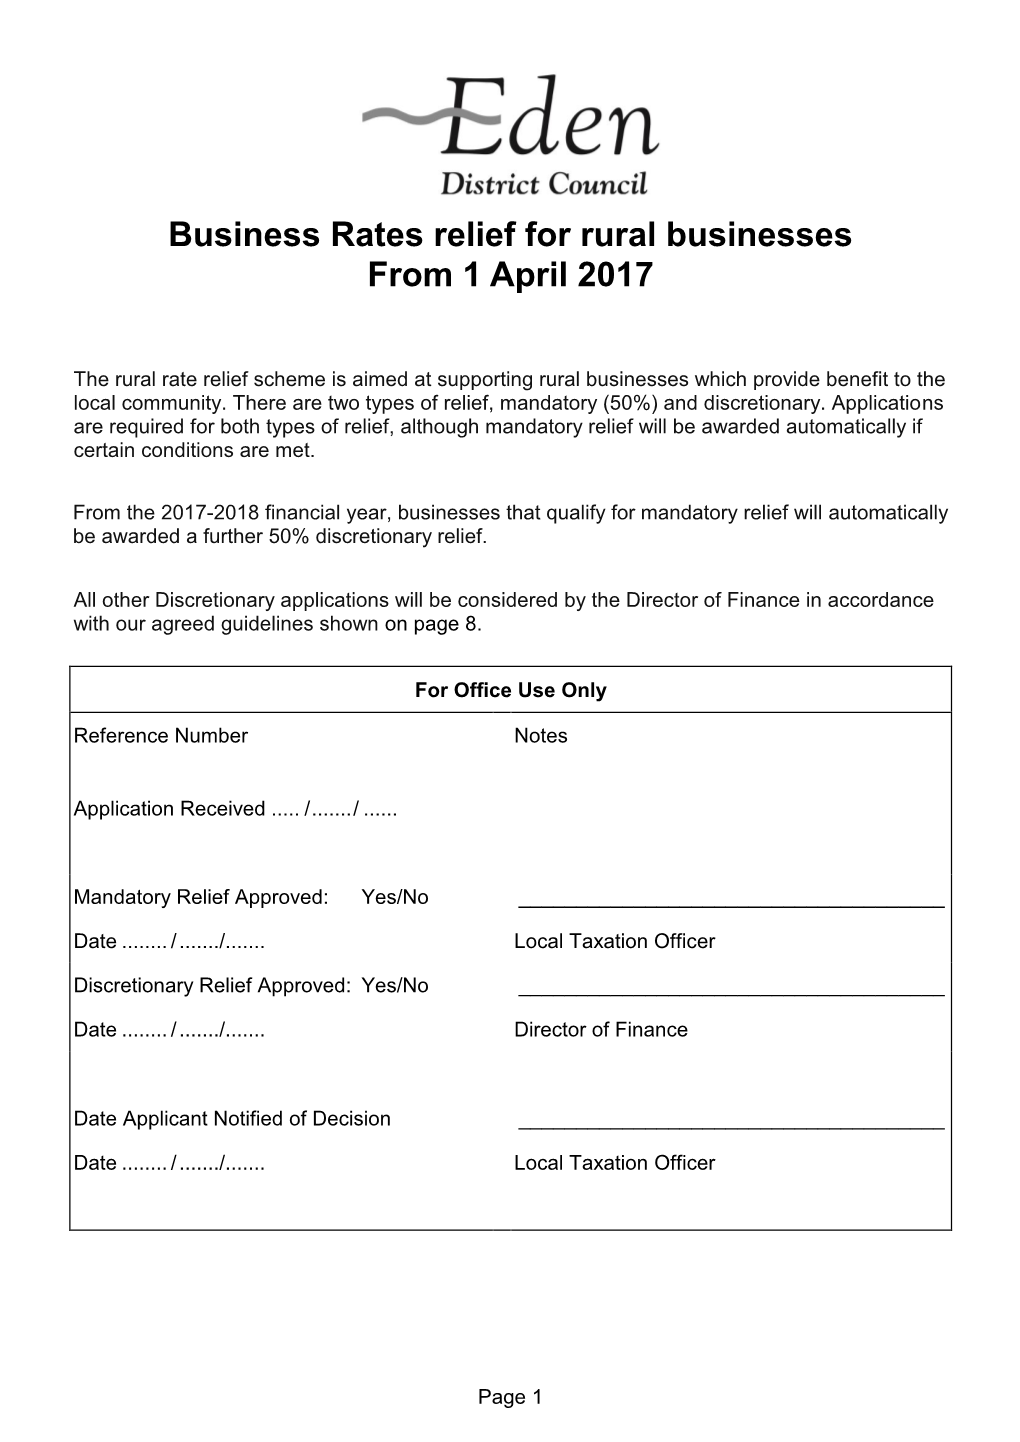 Business Rates Relief for Rural Businesses from 1 April 2017